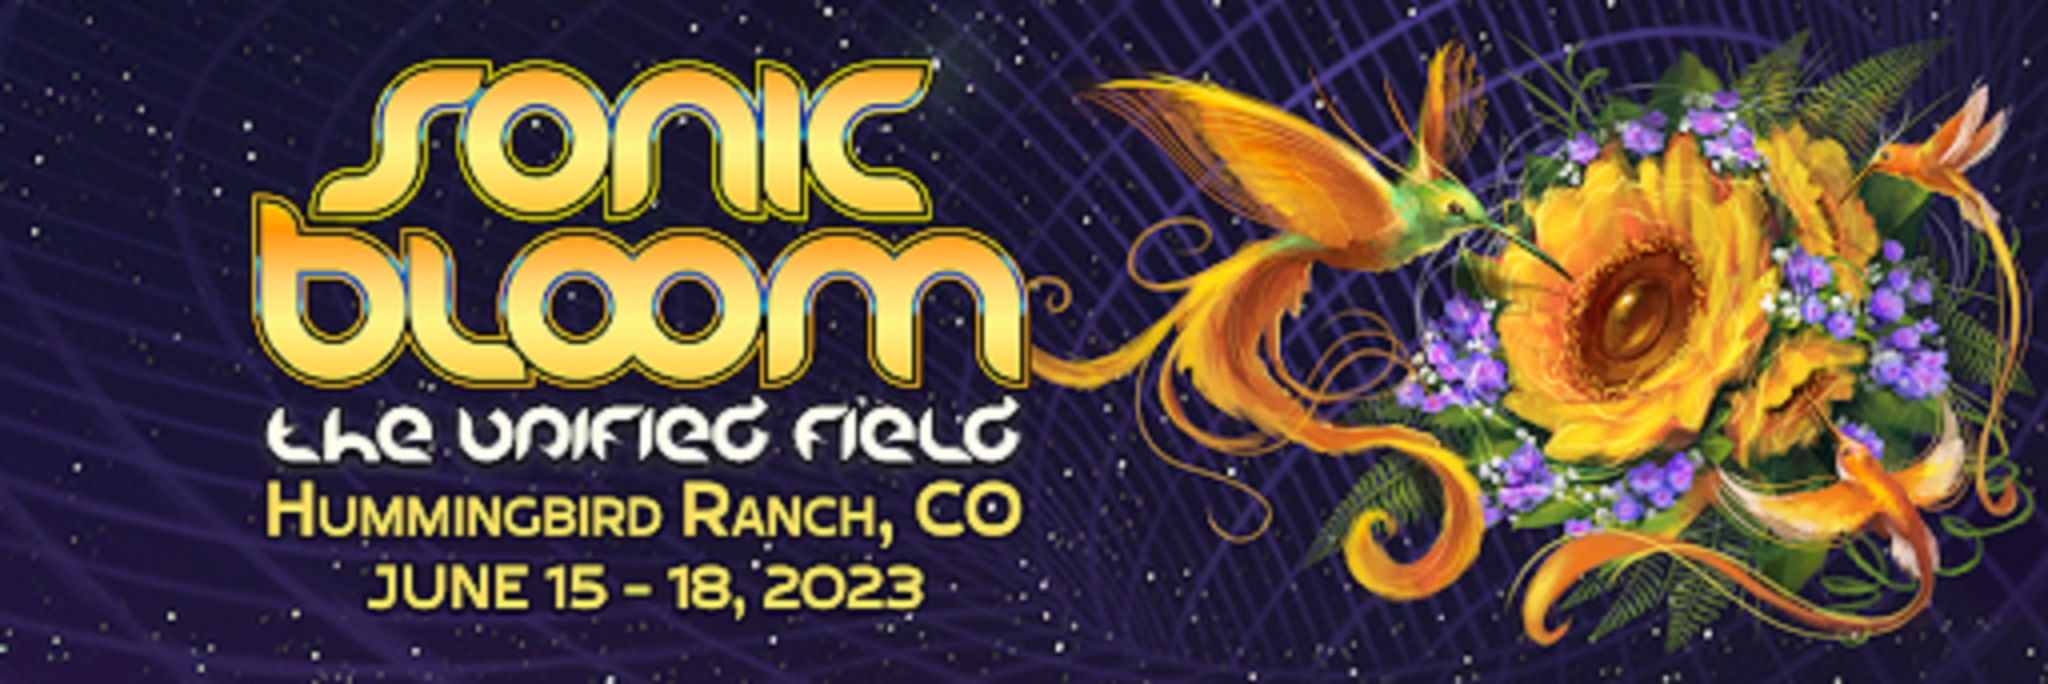 The 16th Annual SONIC BLOOM Announces Over The Top 2023 Musical Lineup Dominated by Top Female Acts & International Flavor